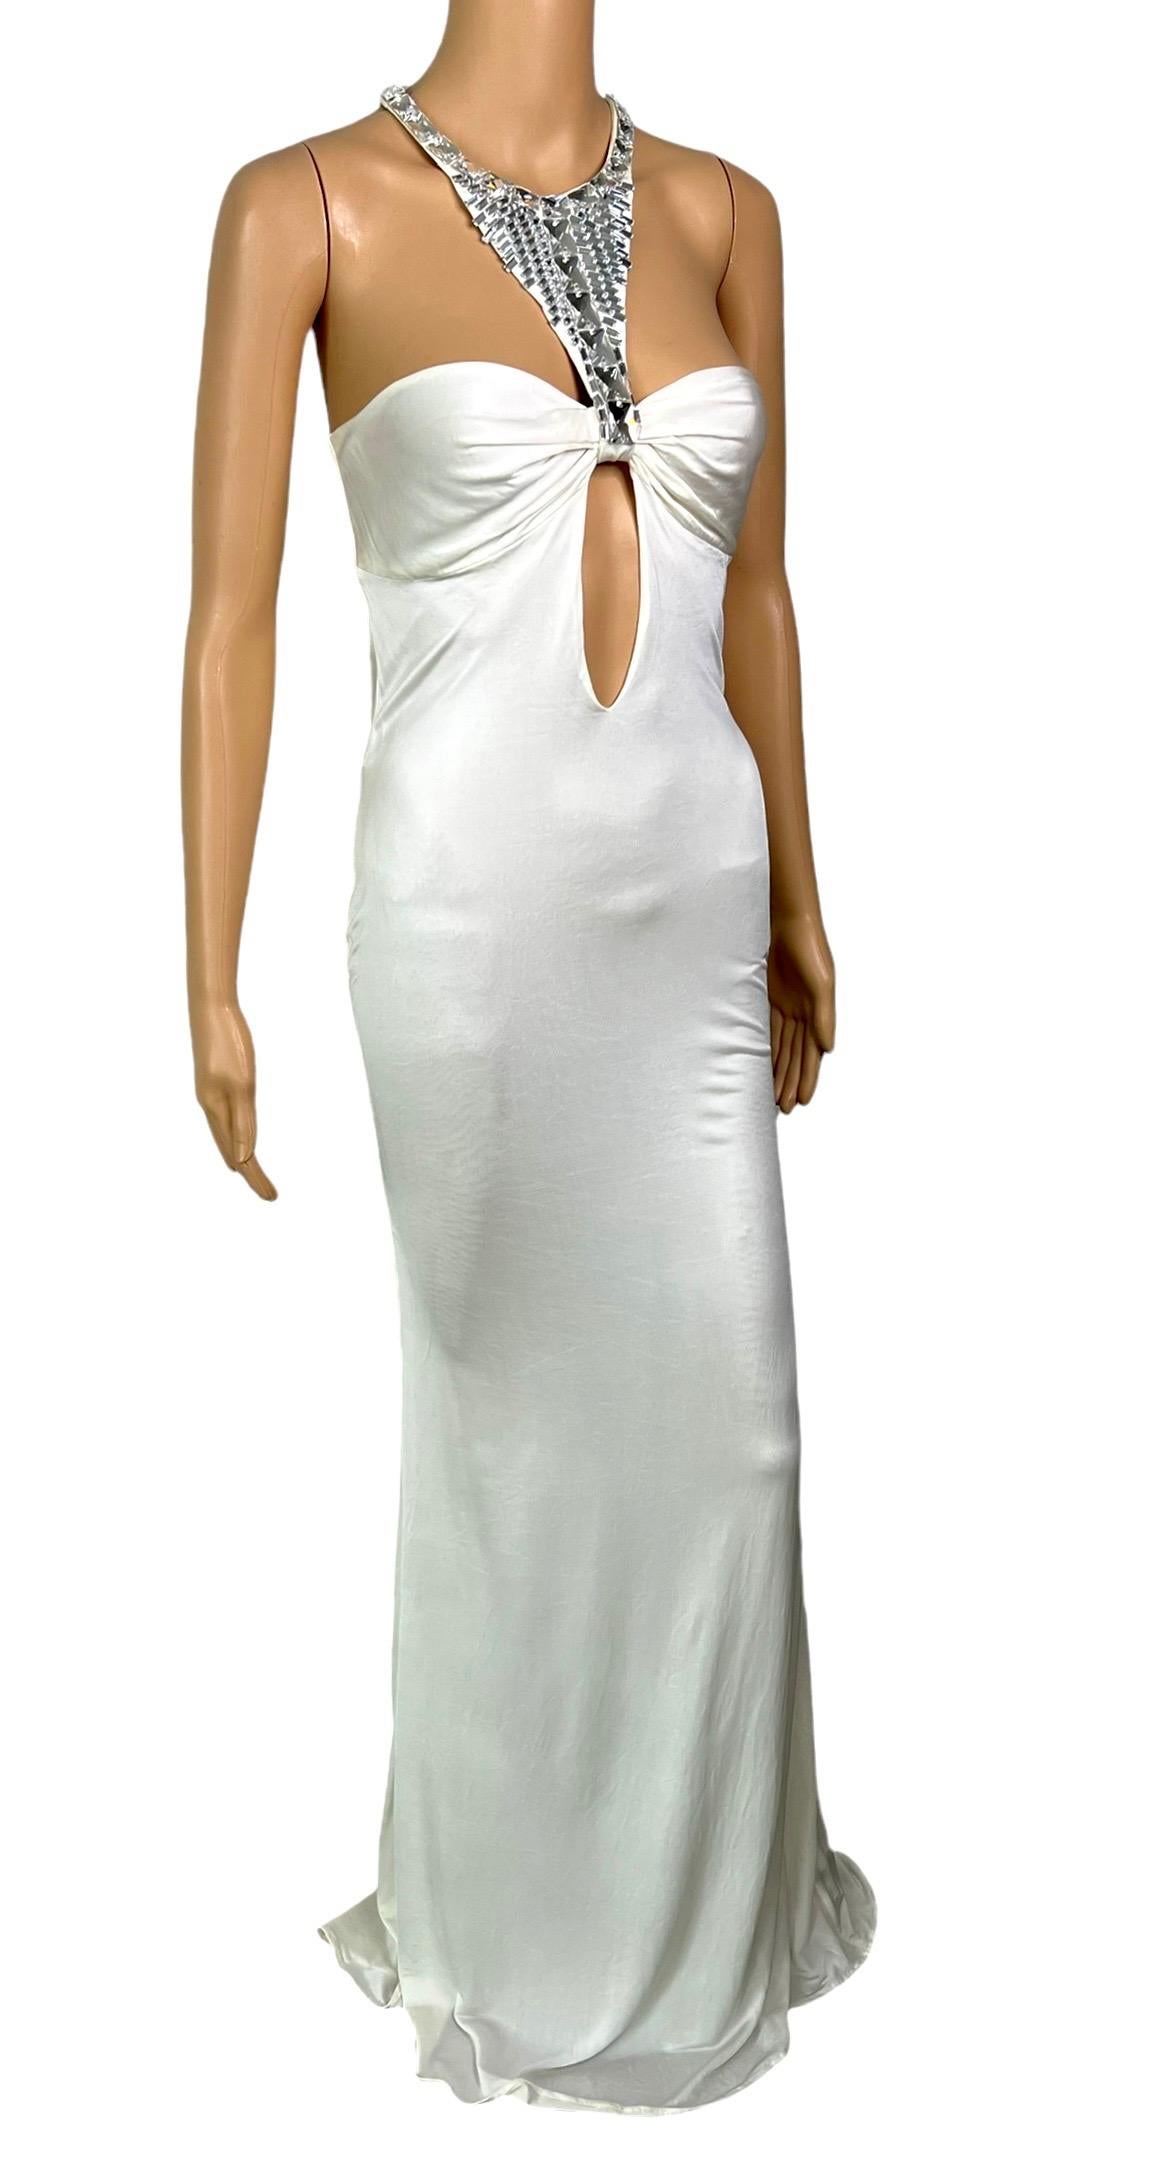 Tom Ford for Gucci F/W 2004 Embellished Plunging Cutout Ivory Evening Dress Gown For Sale 9